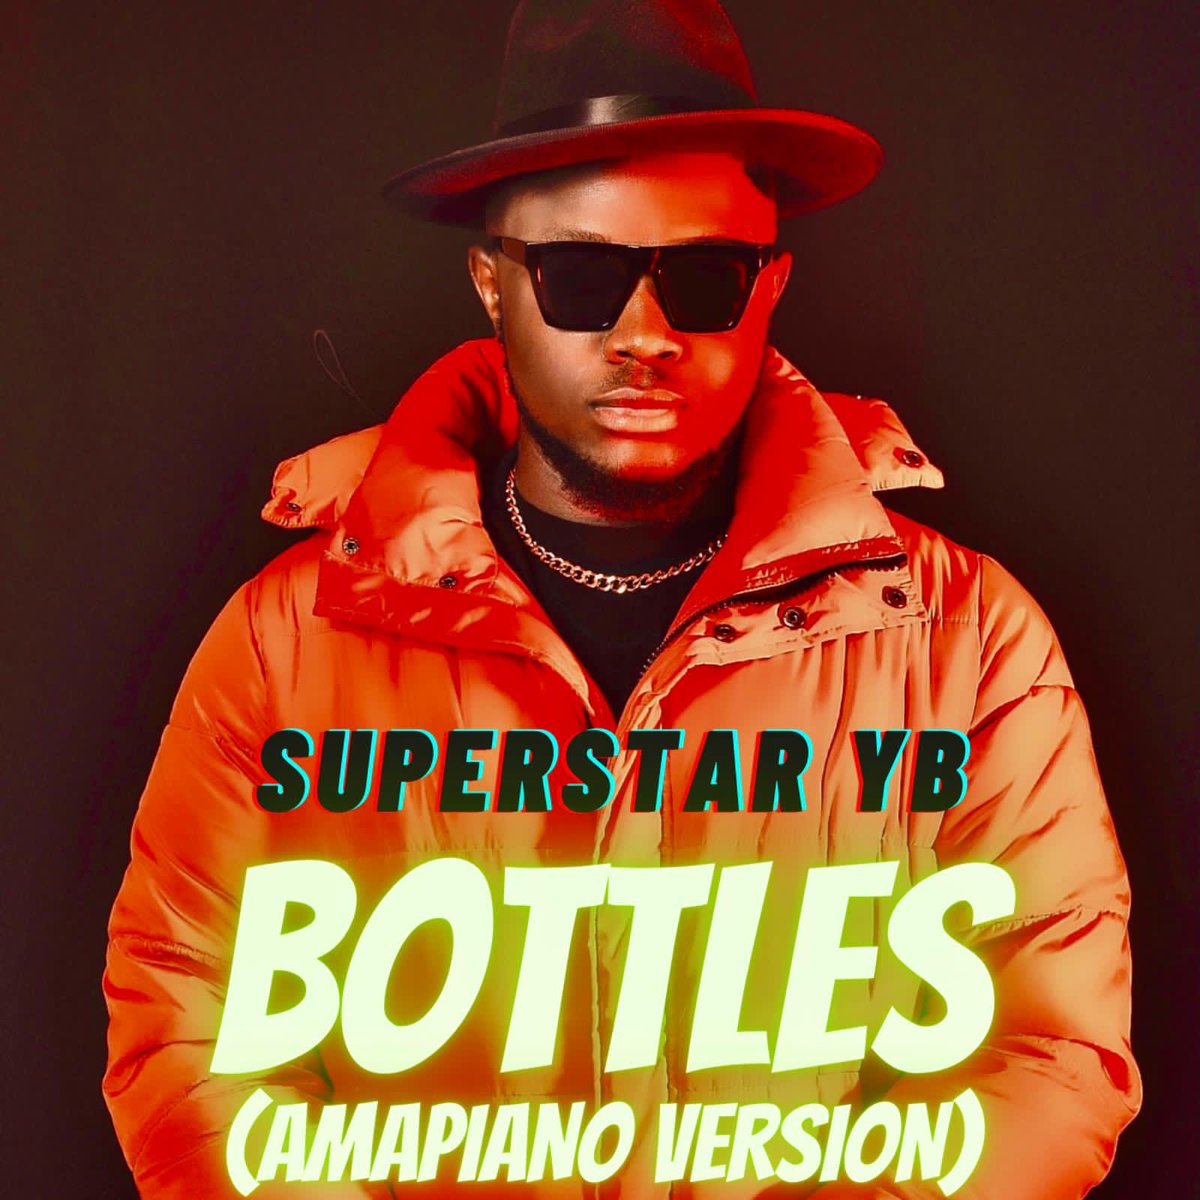 Hey guys have you listened to cool music today? Bottles by 
@Superstaryb_
 is a fine song listen to it #BestAmapianoSong